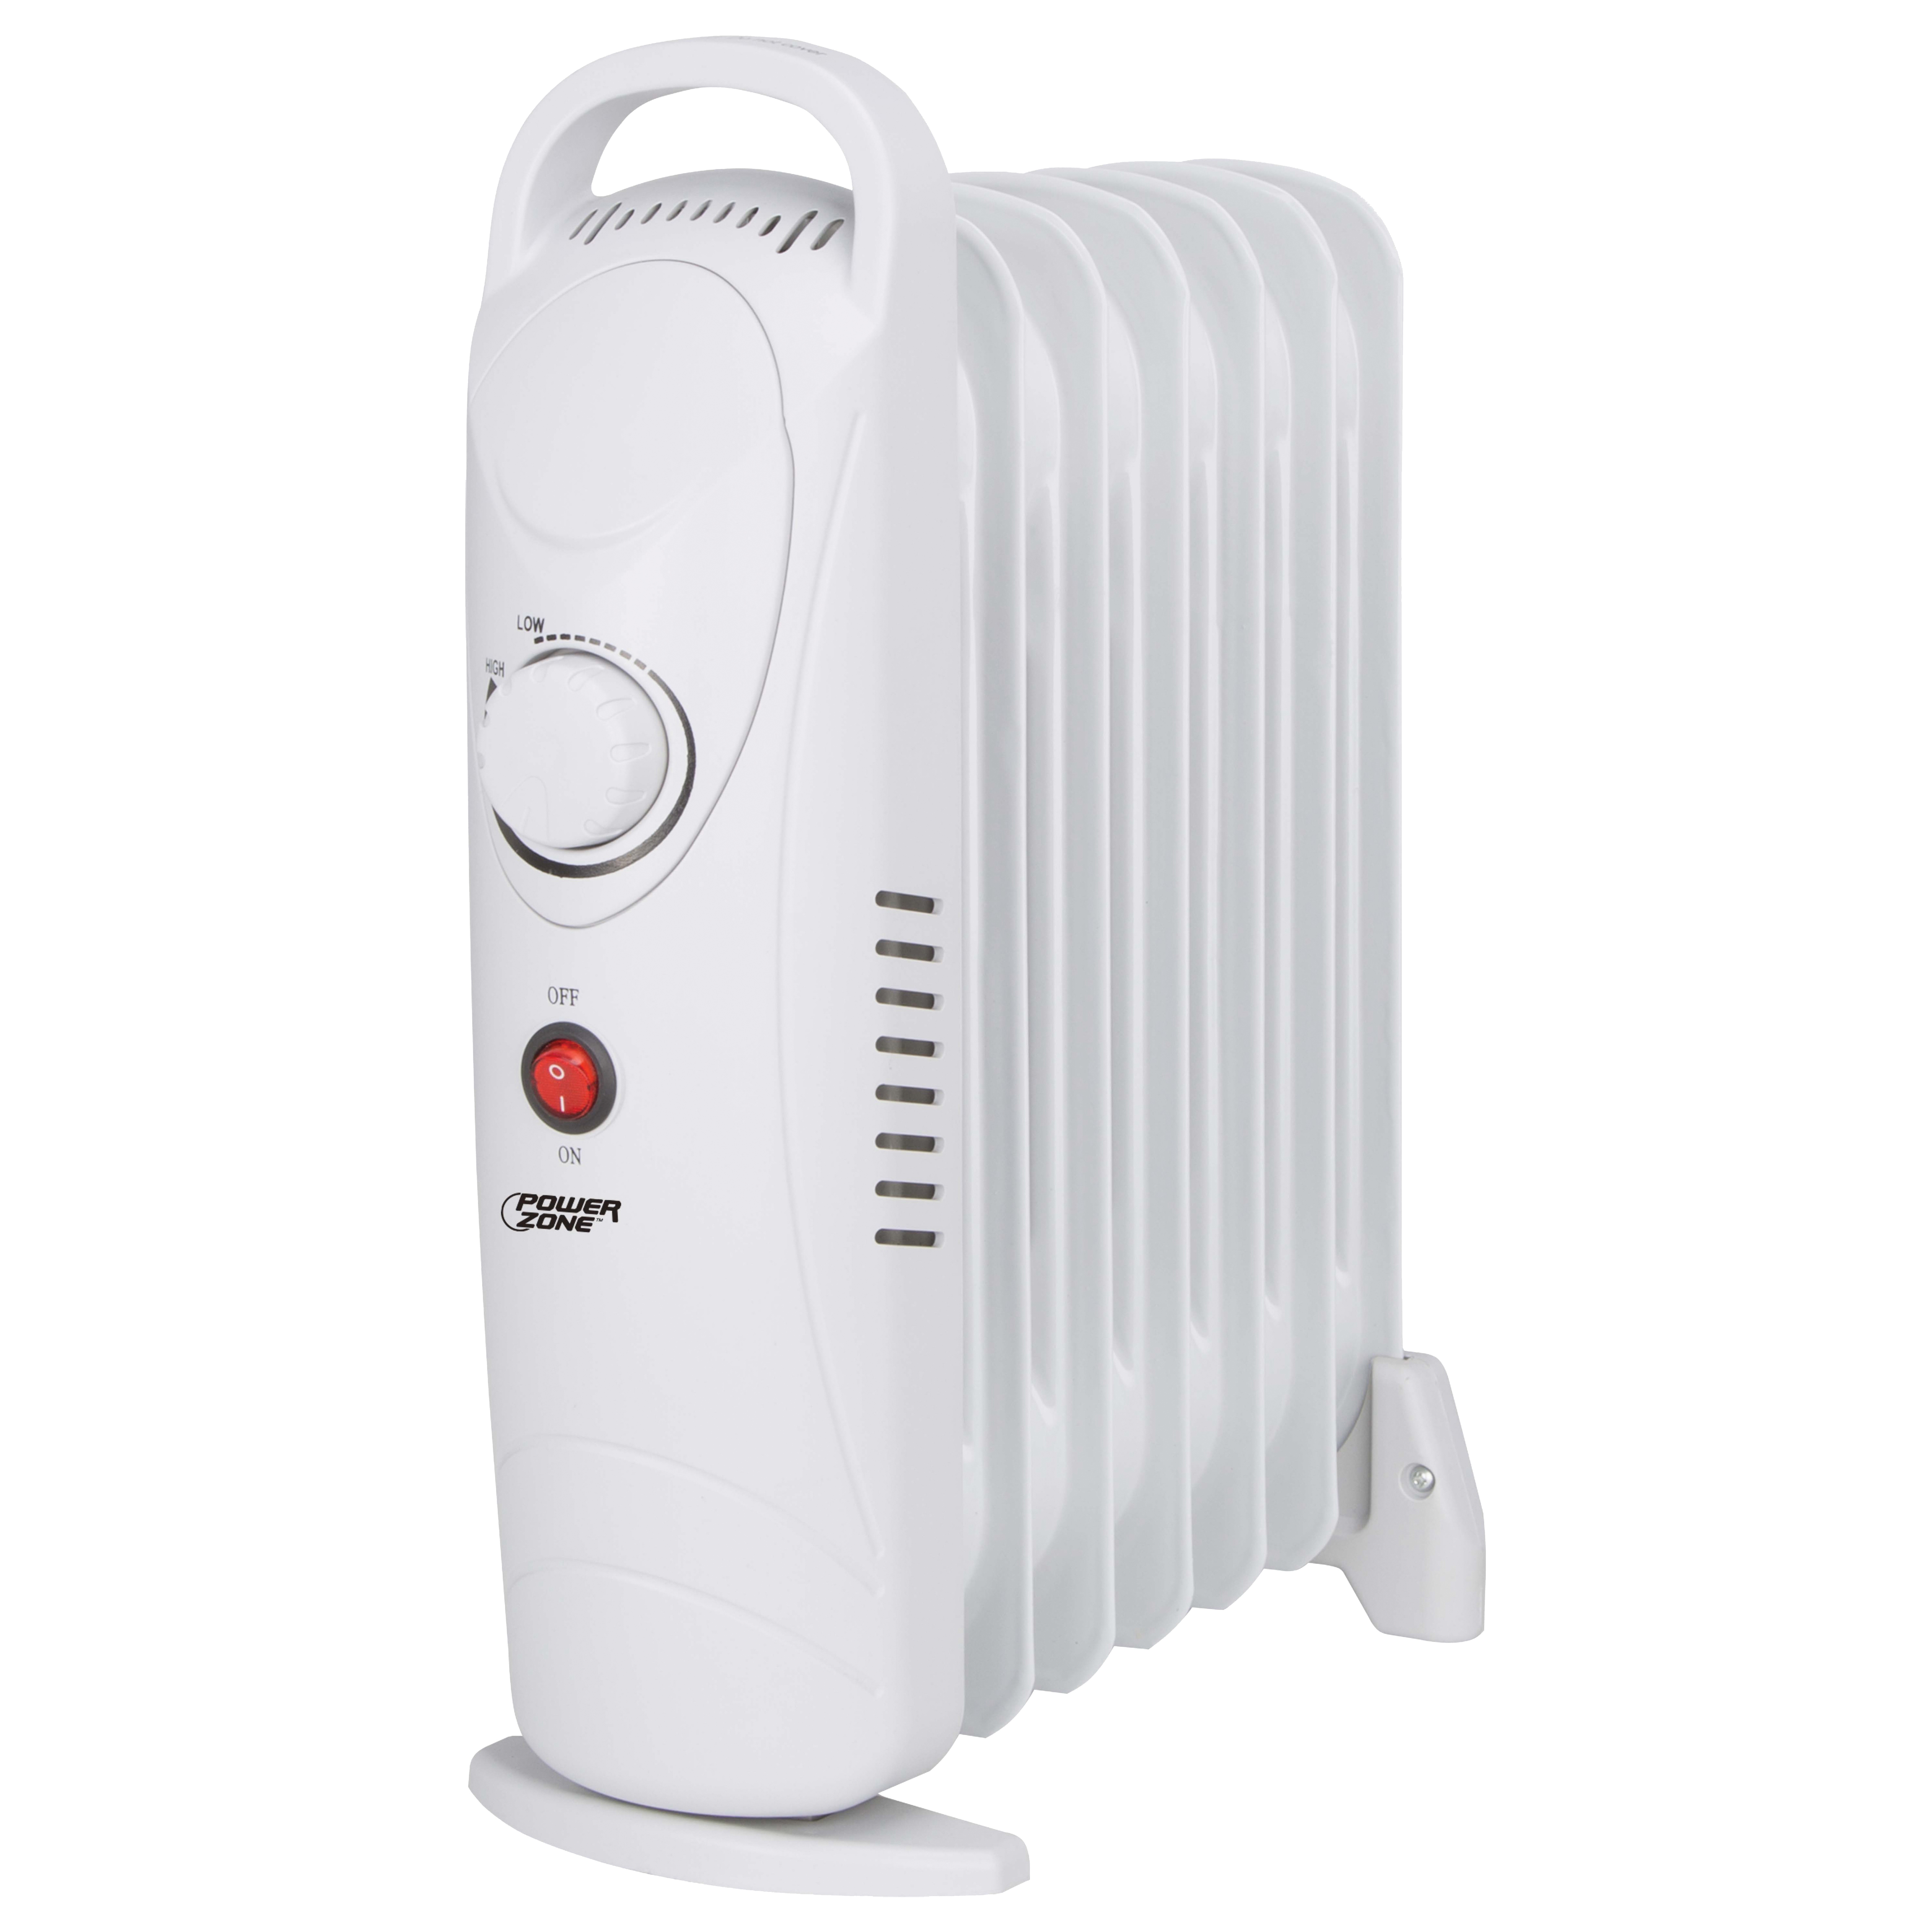 CYPB-7 Mini Oil Filled Heater, 5.8 A, 120 V, 700 W Heating, 1-Heating Stage, White